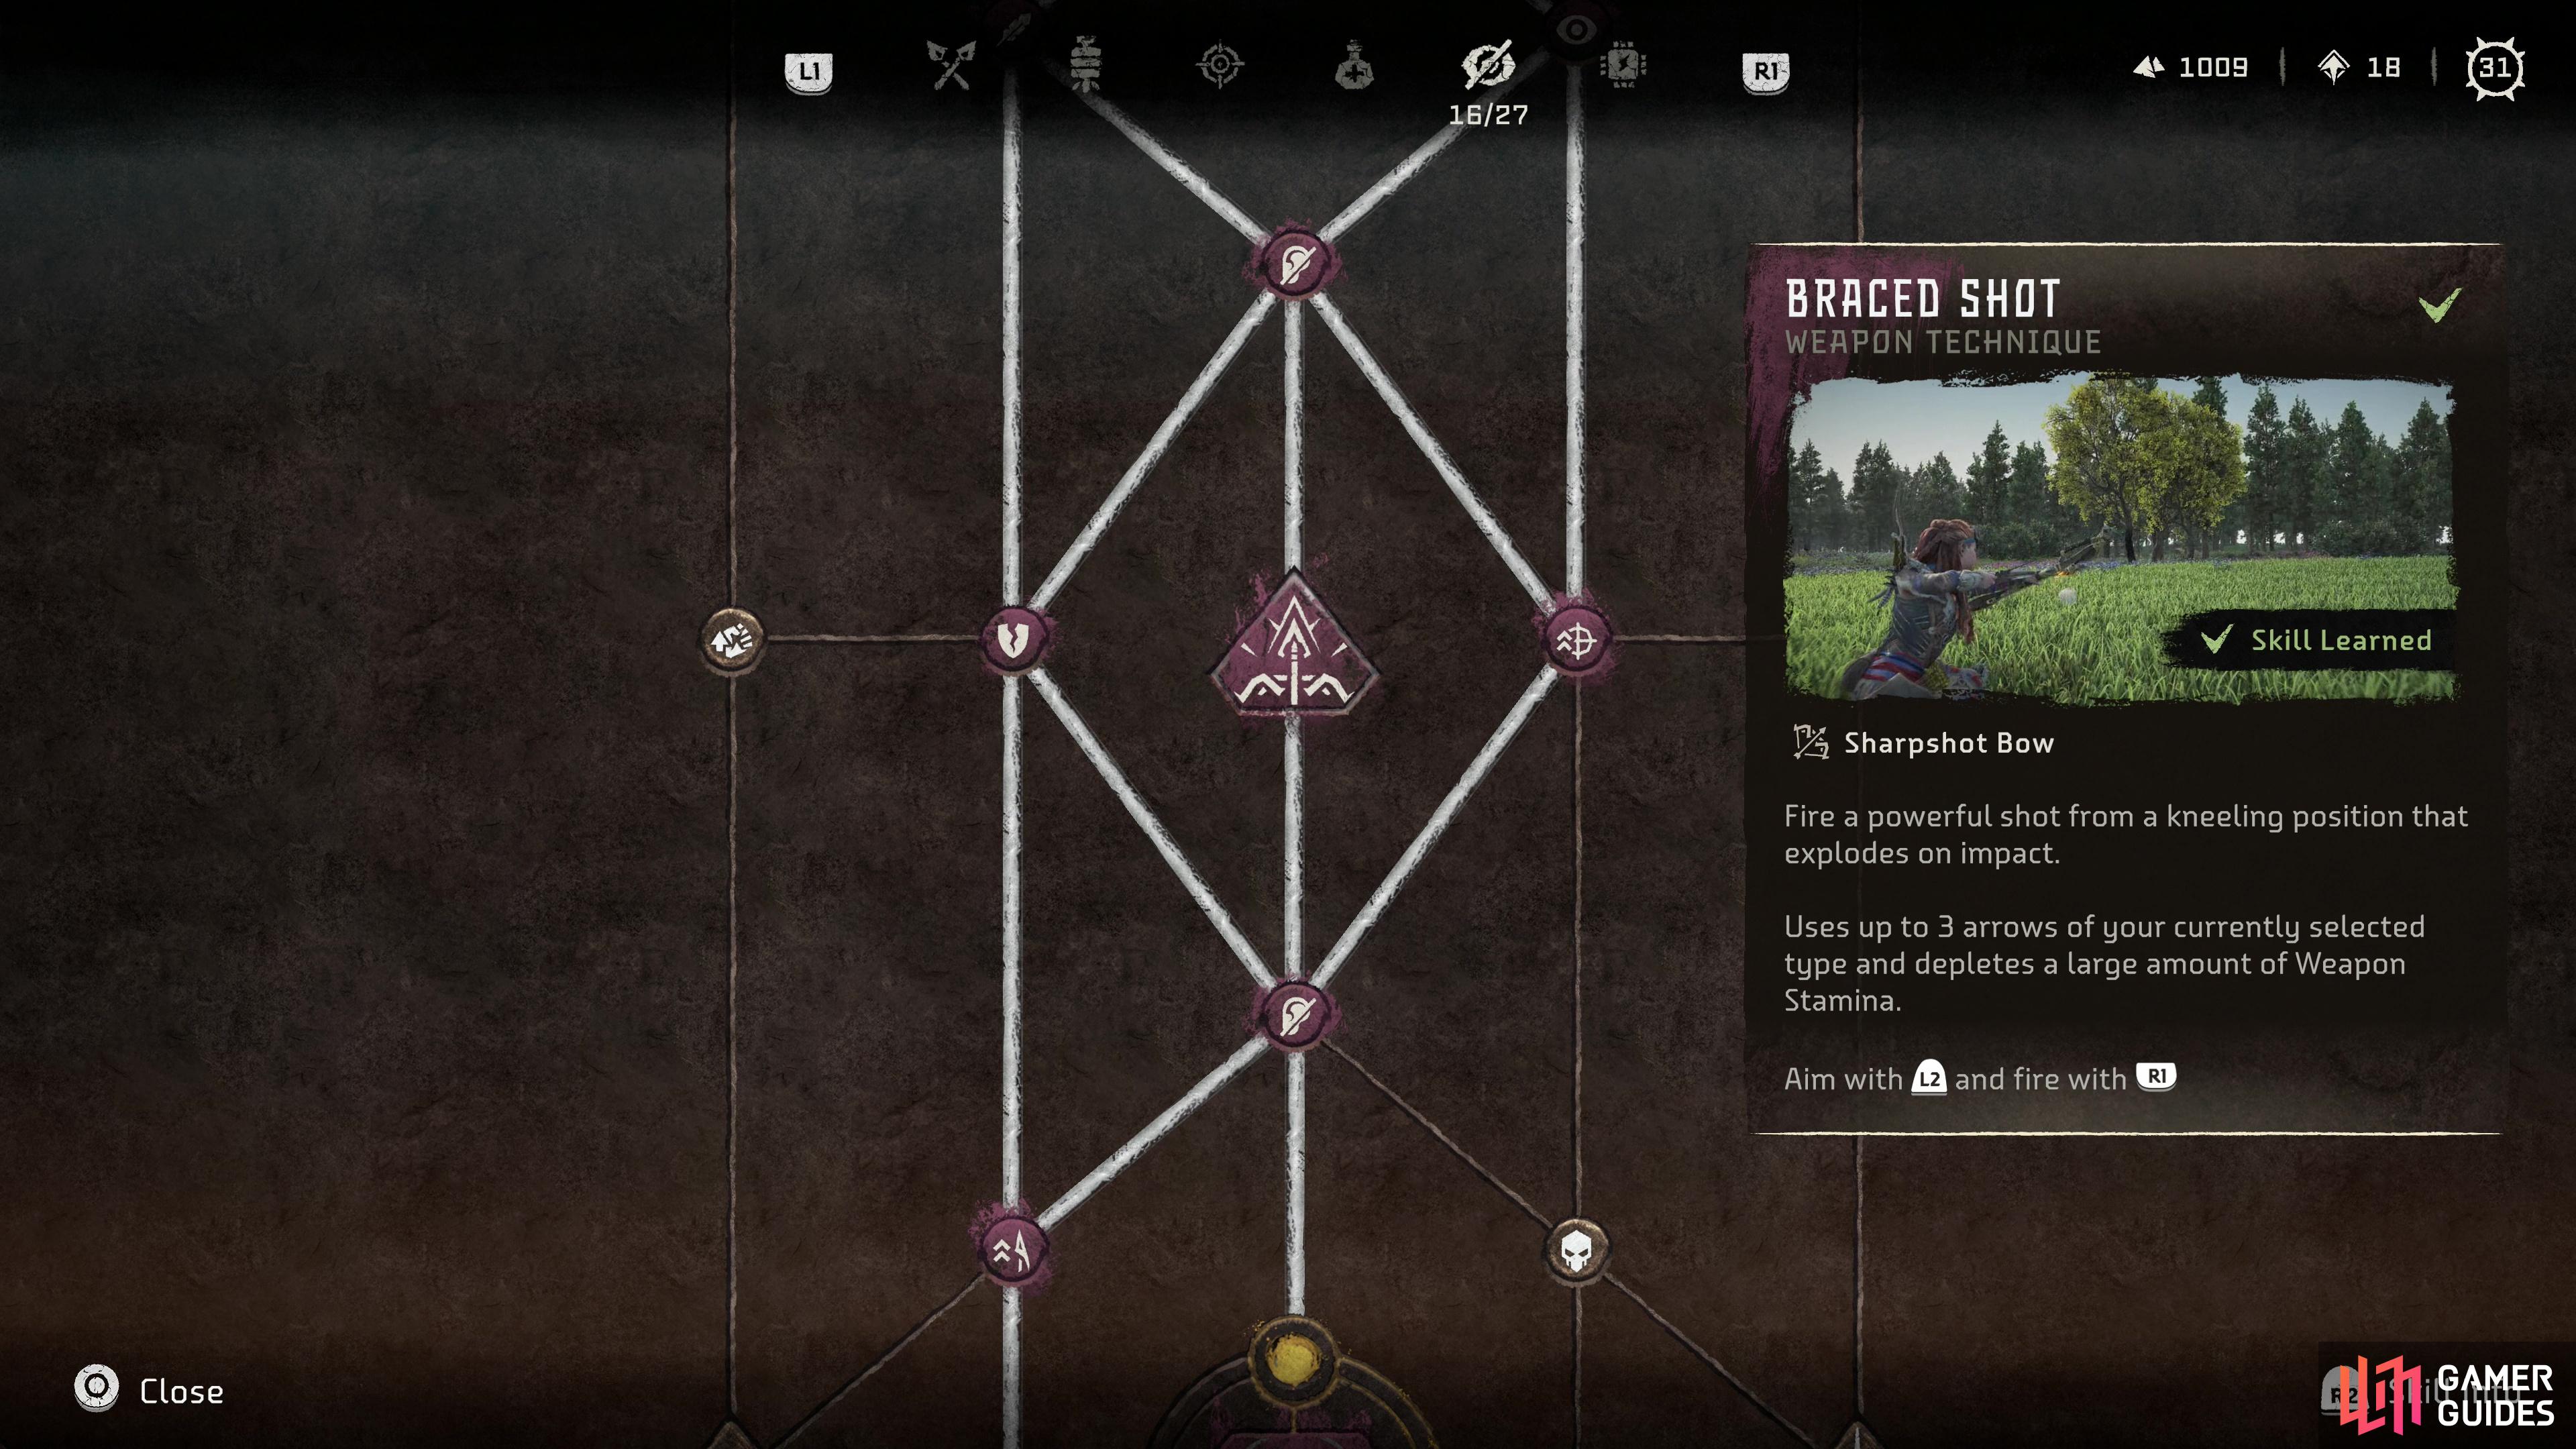 Weapon Techniques can be purchased in the skill tree - they're easy to spot due to their distinct pentagonal shape.